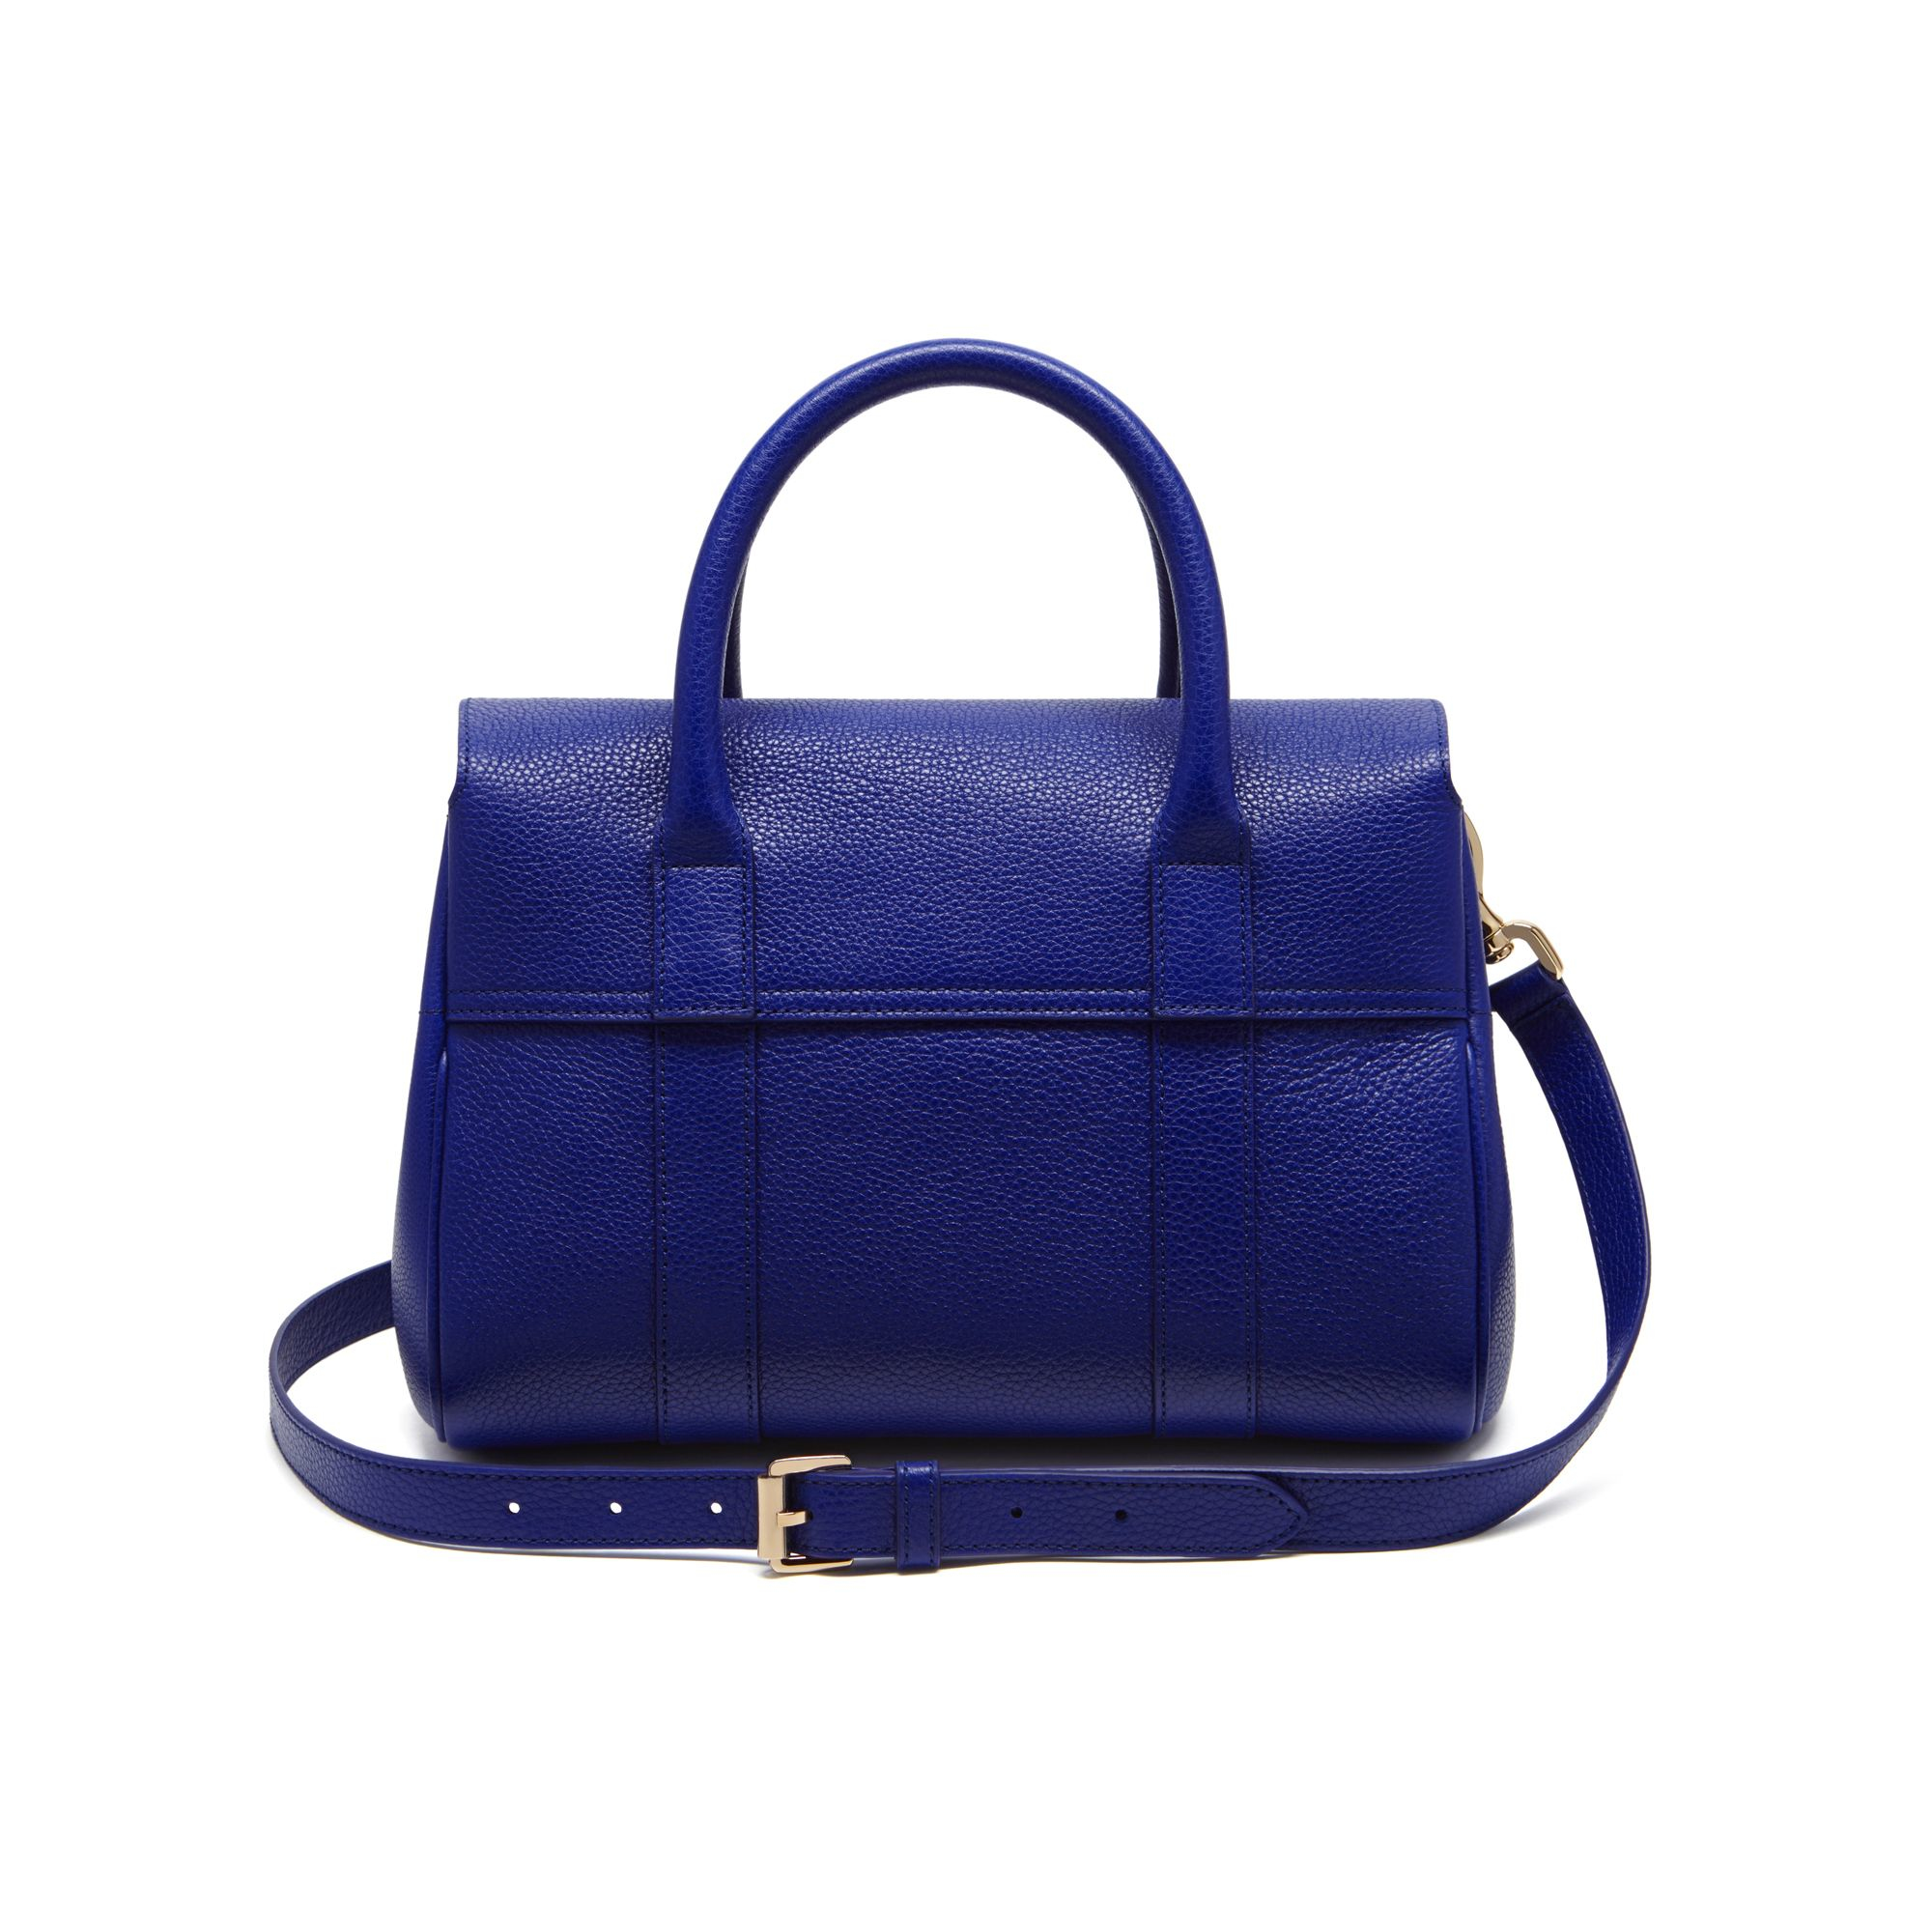 Mulberry Bayswater Small Grained Leather Bag in Blue - Lyst